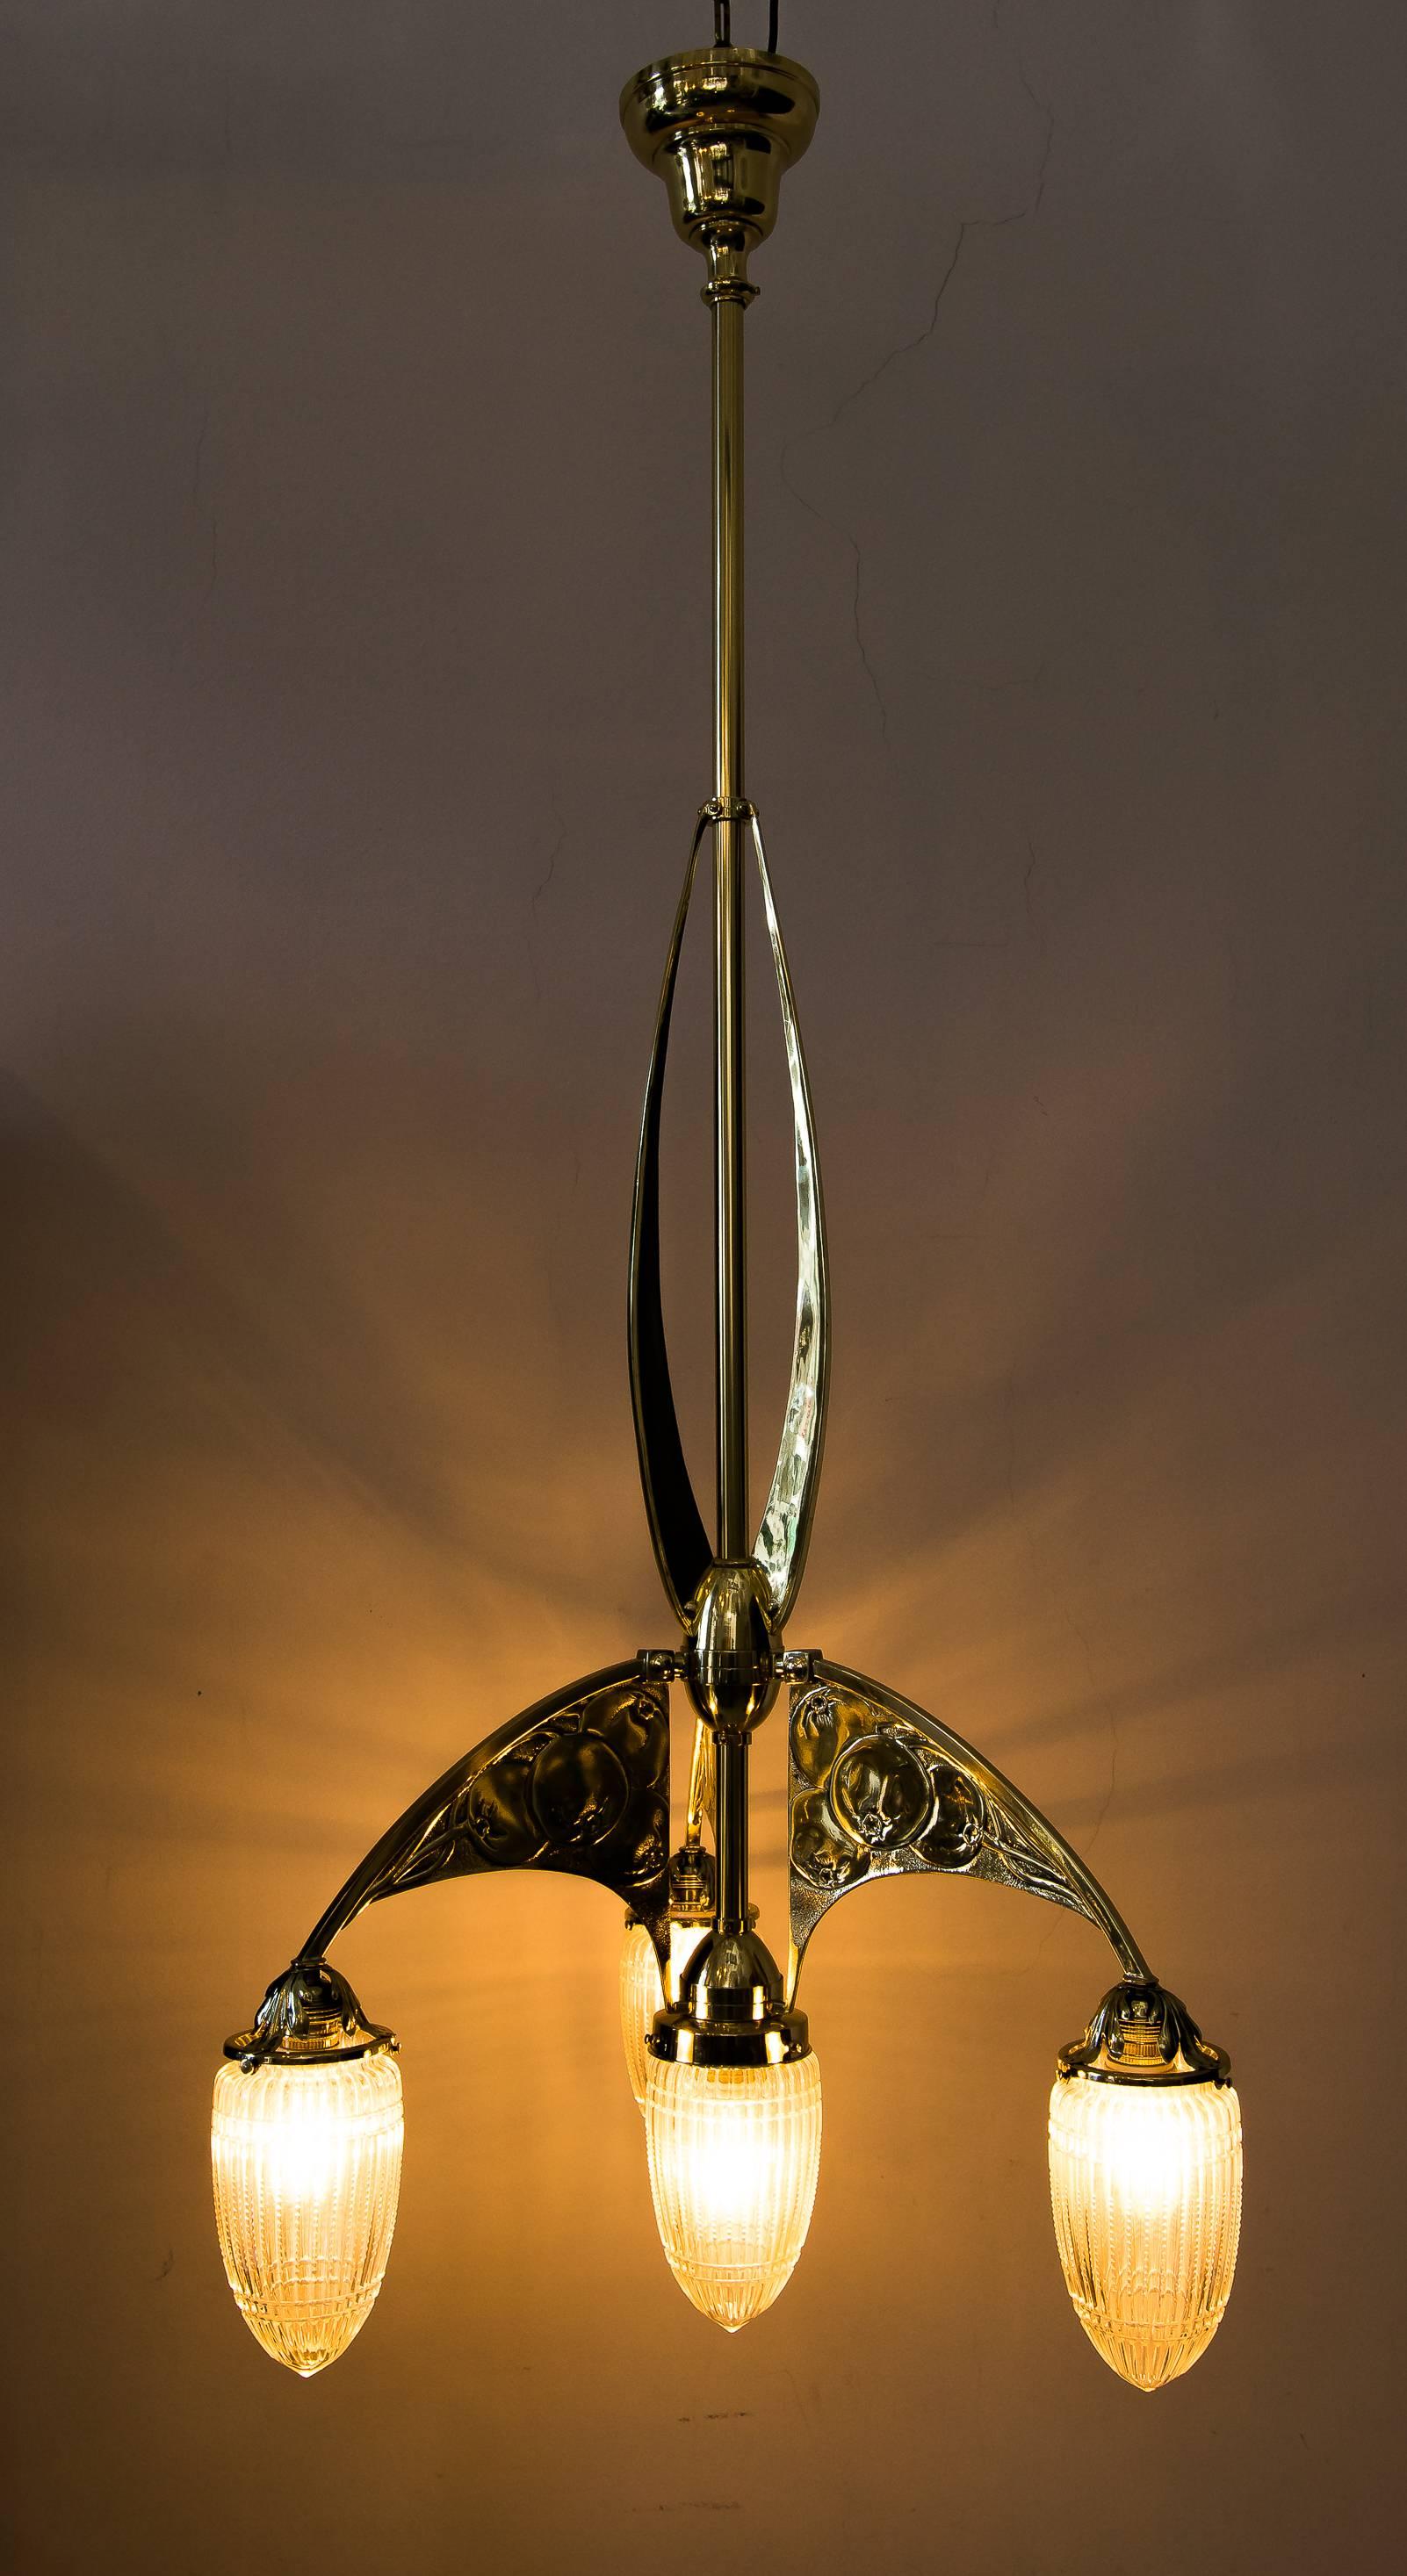 Beautiful Art Nouveau chandelier with original glass, circa 1908
Polished and stove enameled.
 